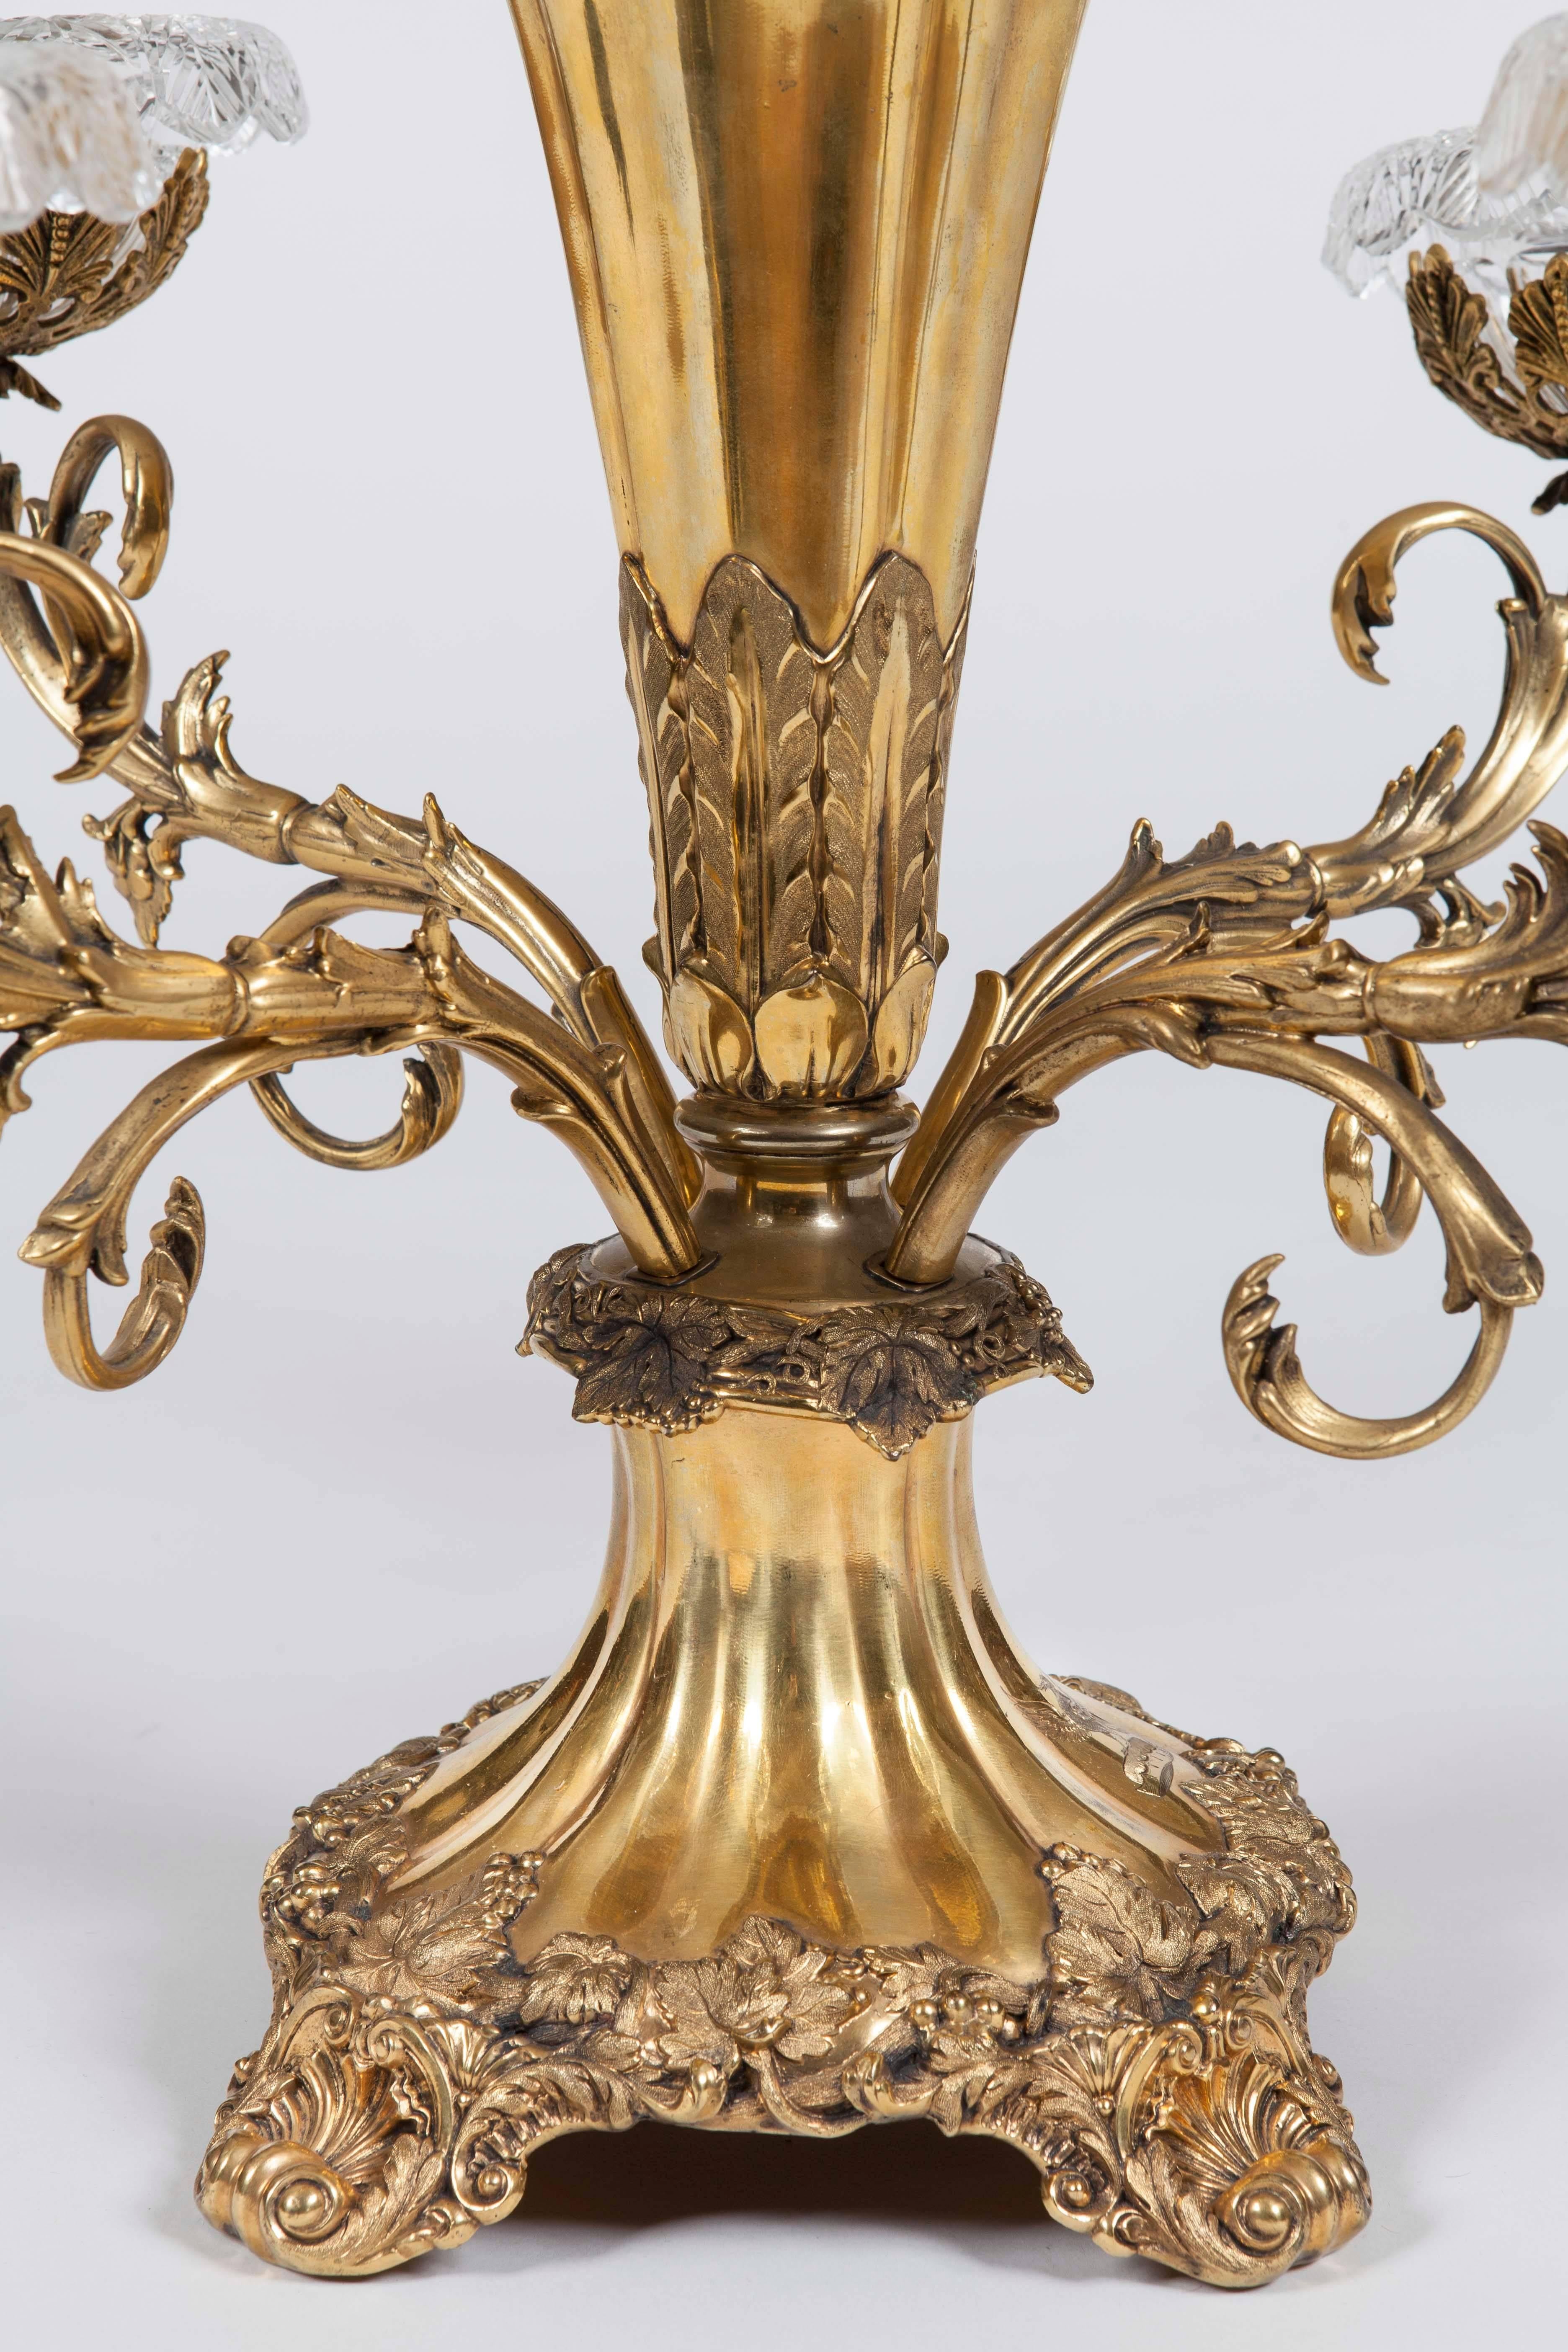 A pair of Victorian silver gilt plated epergnes
Each rising from quadripartite scallop feet, the bodies dressed with fruiting vines and foliates, issuing four scrolled and removable arms holding cut lead crystal bowls with lobed rims, framing the